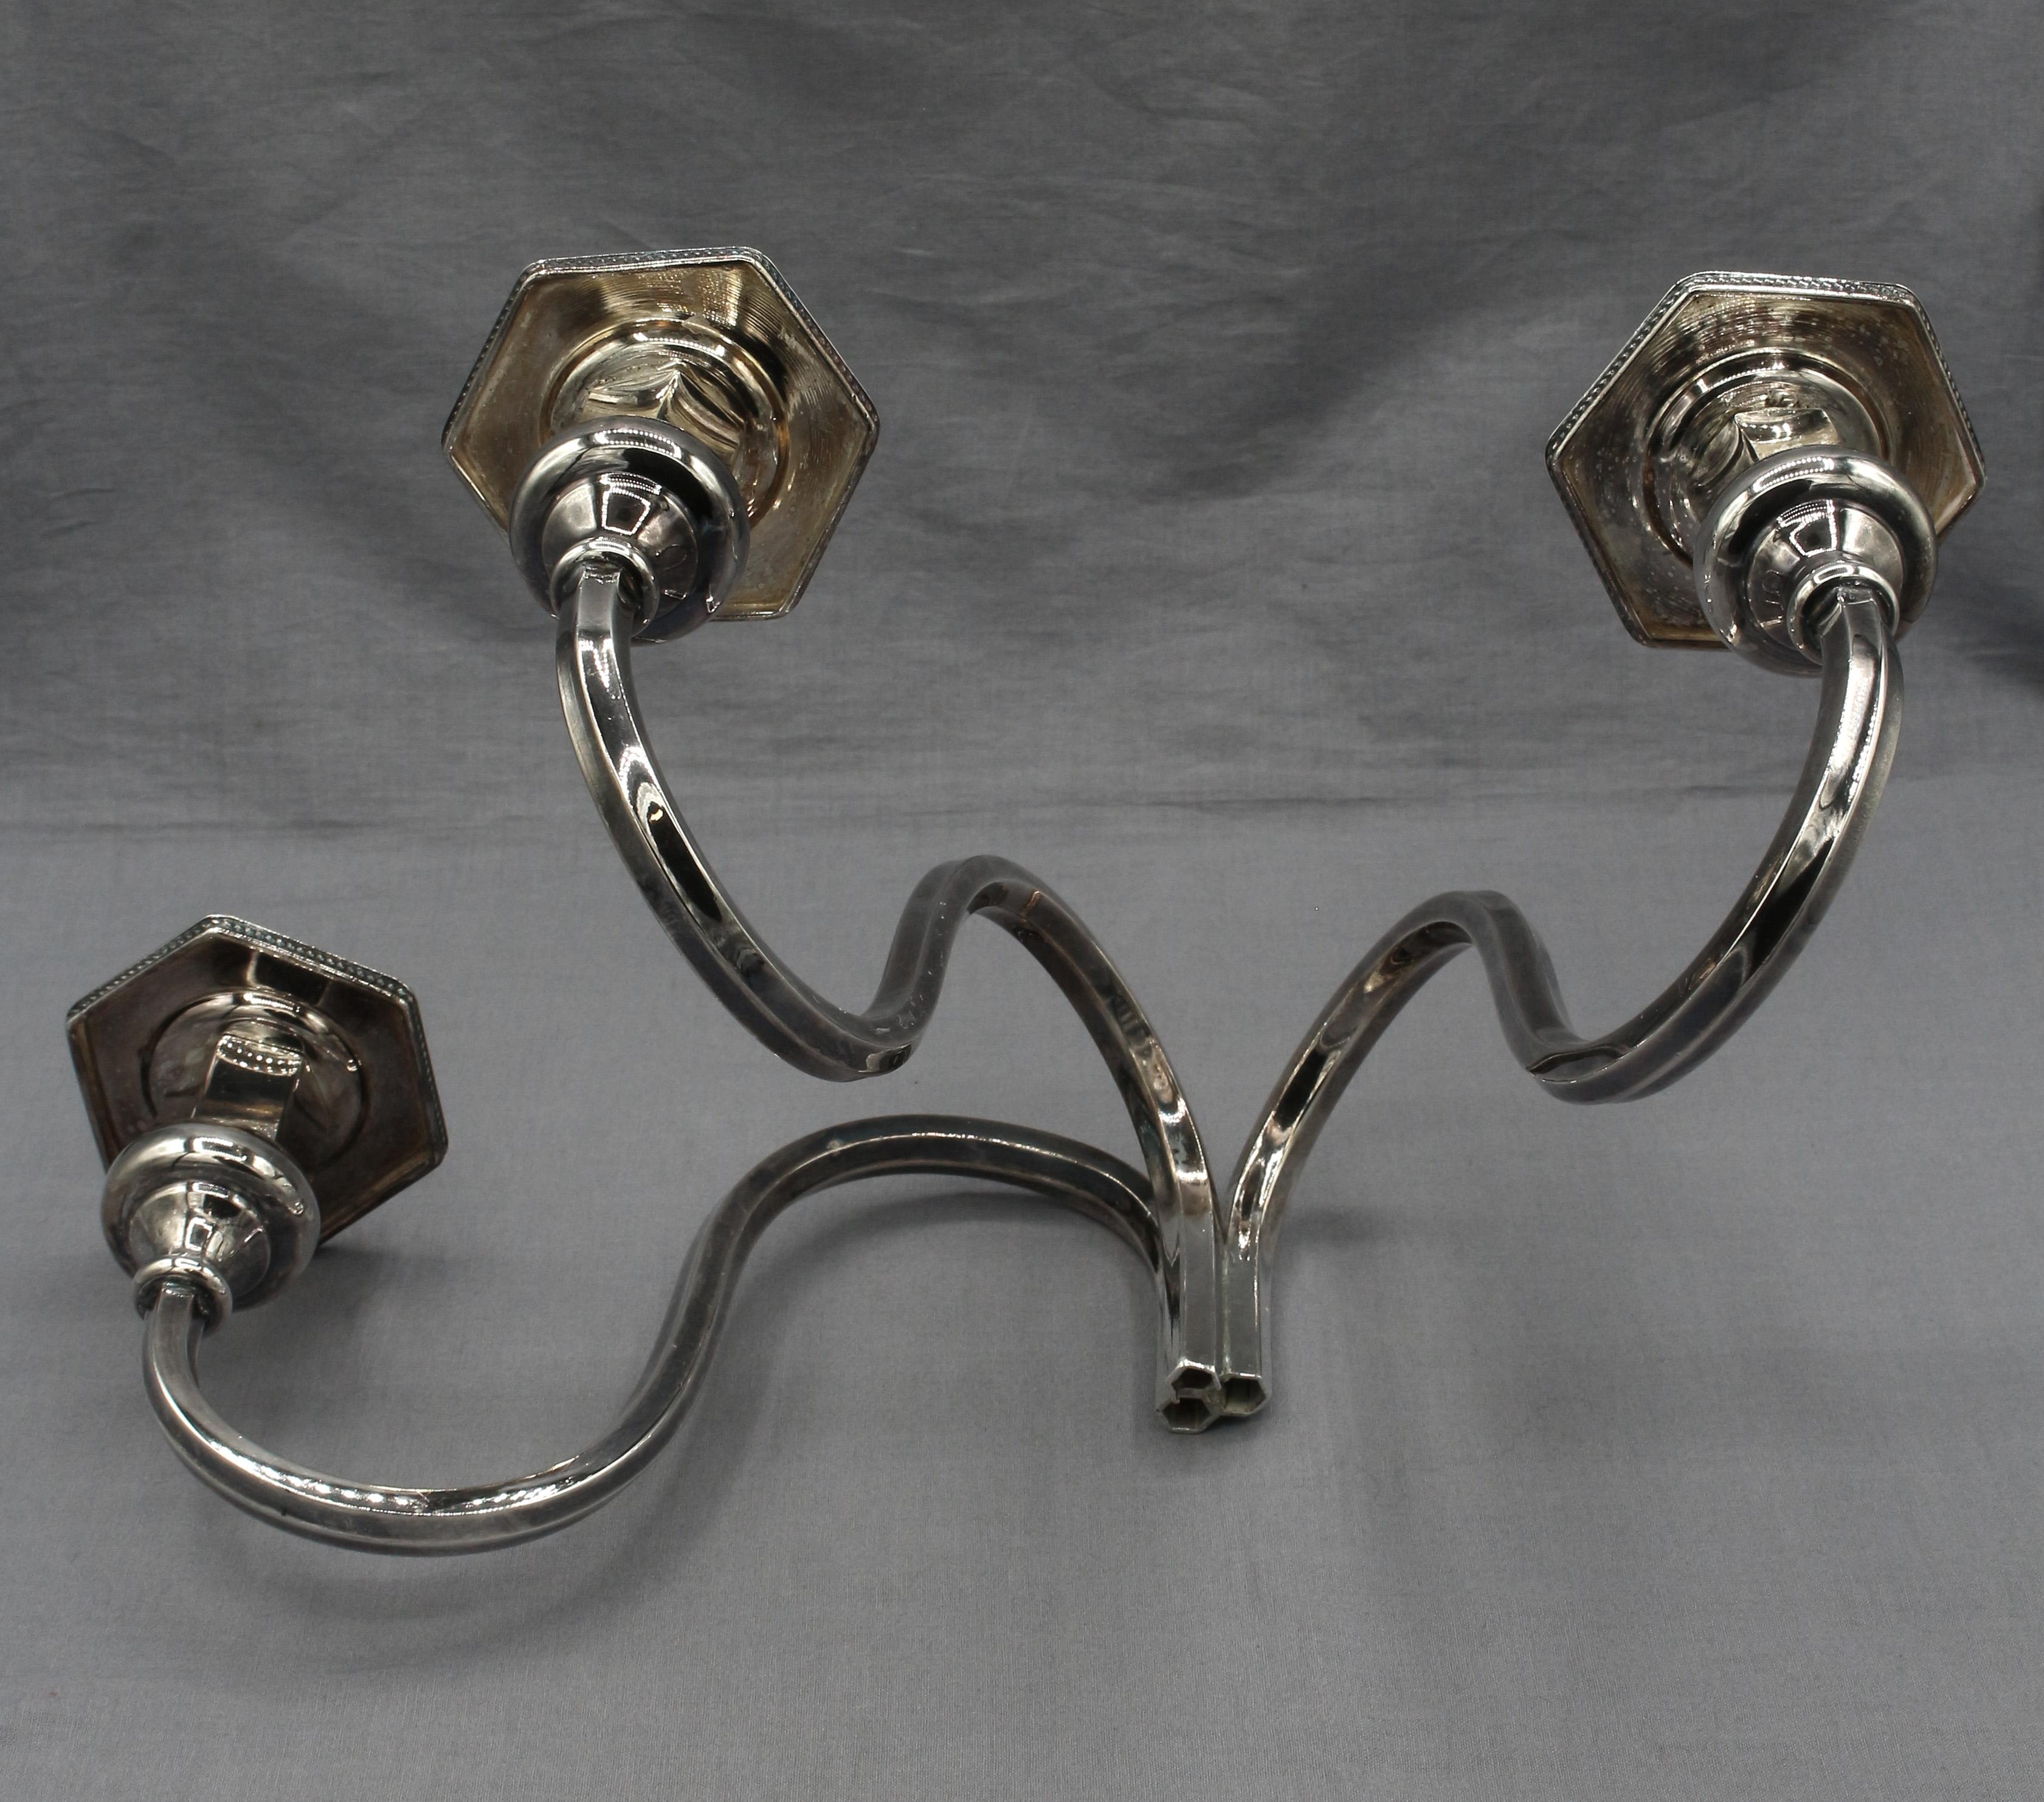 Circa 1930s English Silver on Copper 3-Light Wall Sconce For Sale 4